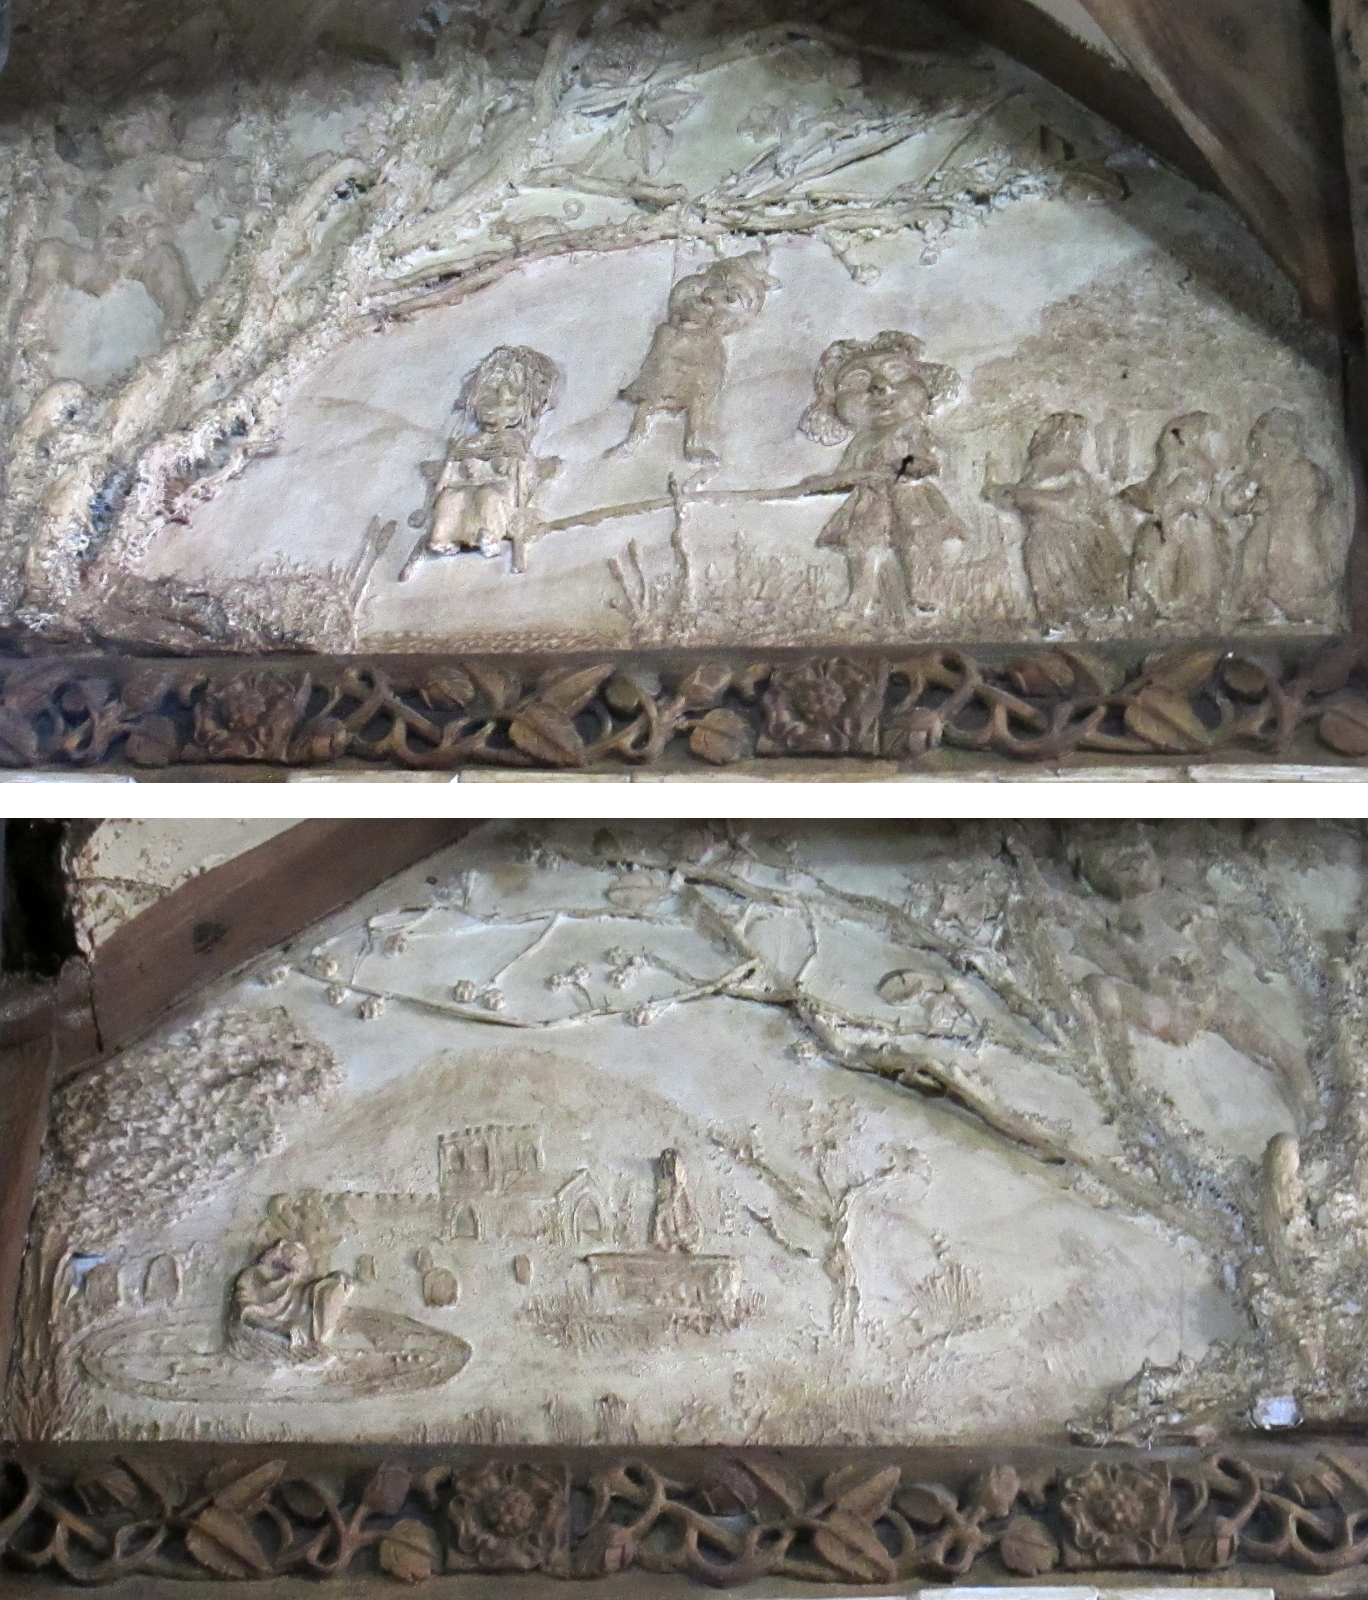 Scenes from the plaster frieze at Y Sospan, Dolgellau, showing trial and execution of witches (above) and a necromancer raising the dead (below) © Remy Dean